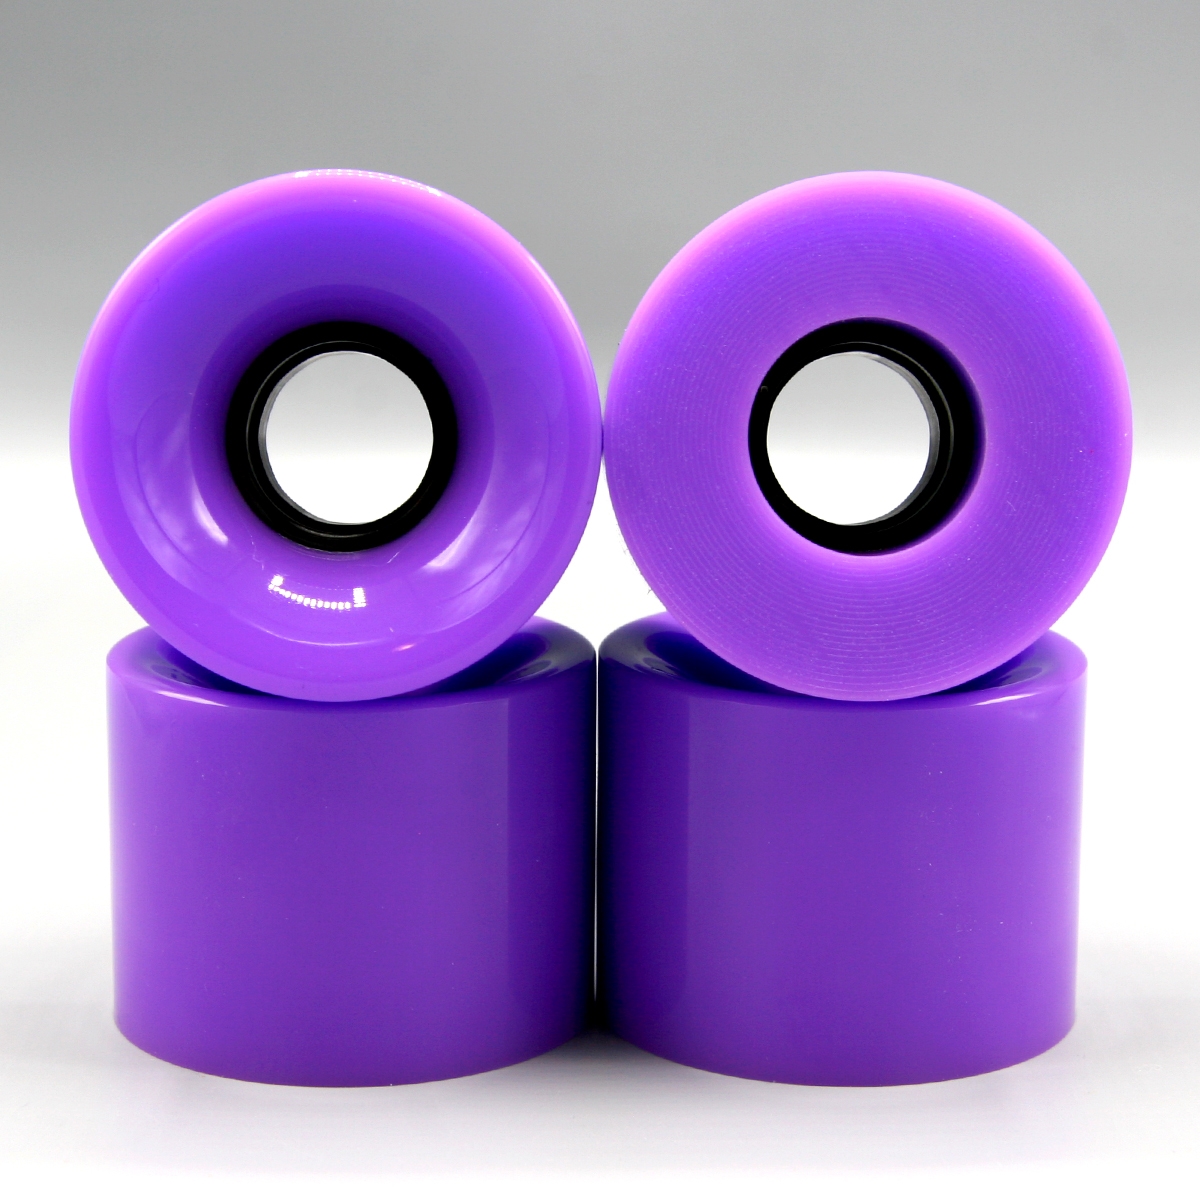 Blank 60mm (Solid Purple) - Includes 1/4" Risers